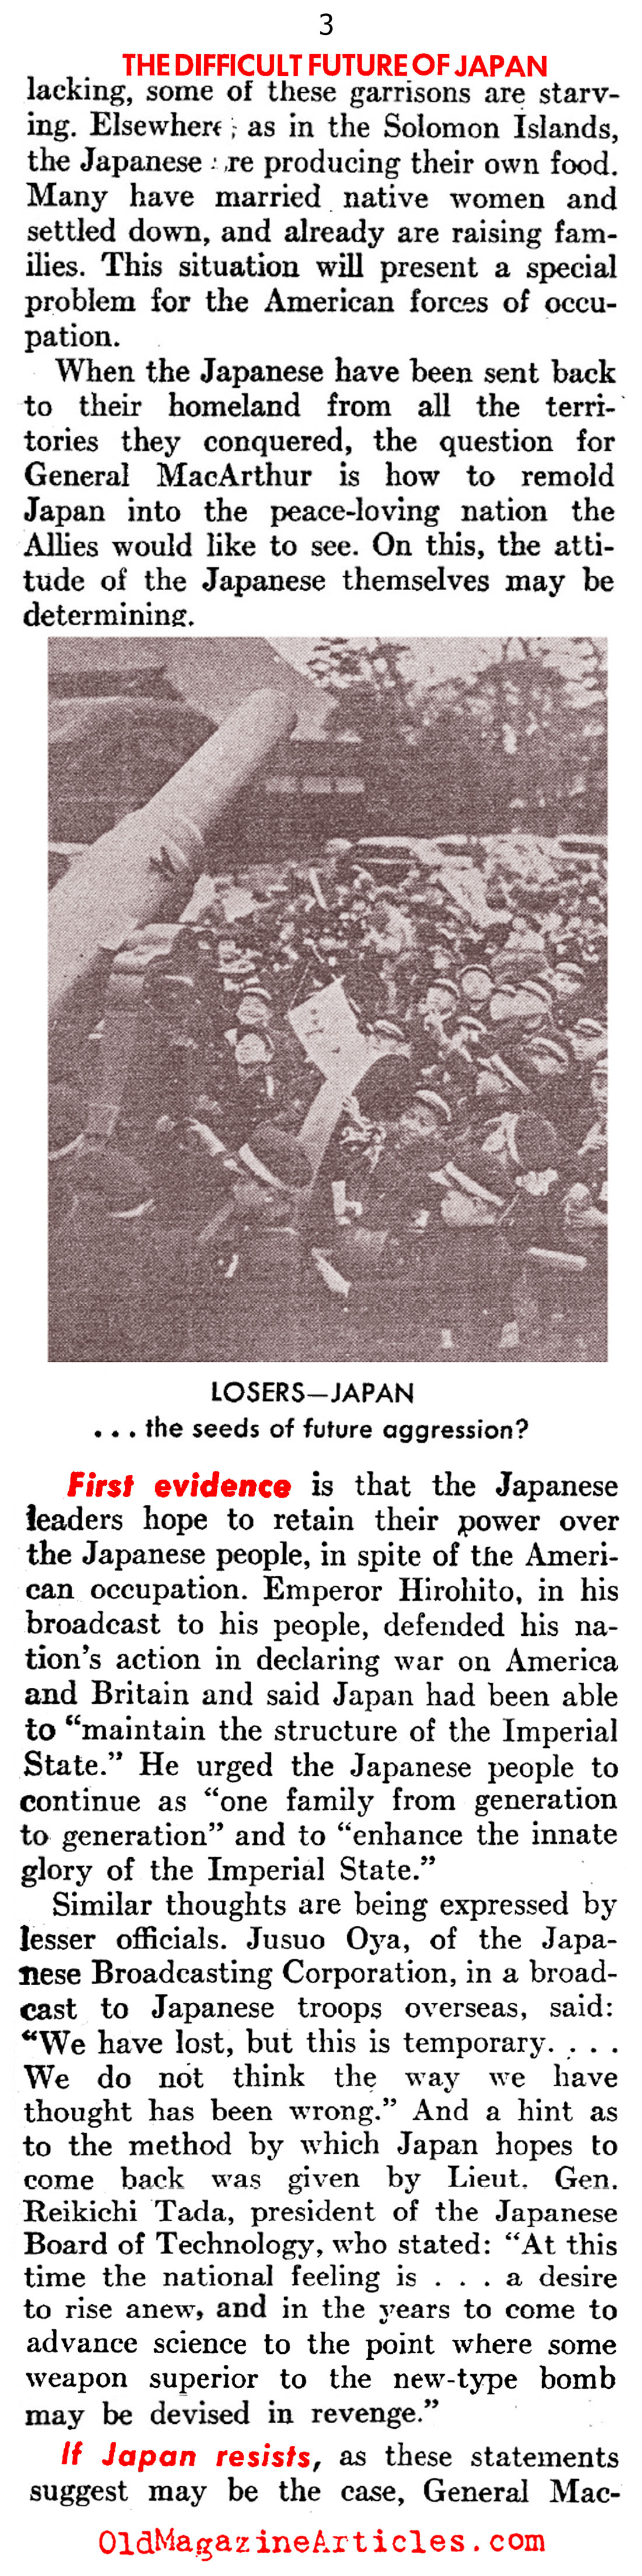 Japan Has Been Beaten. Now What? (United States News, 1945)